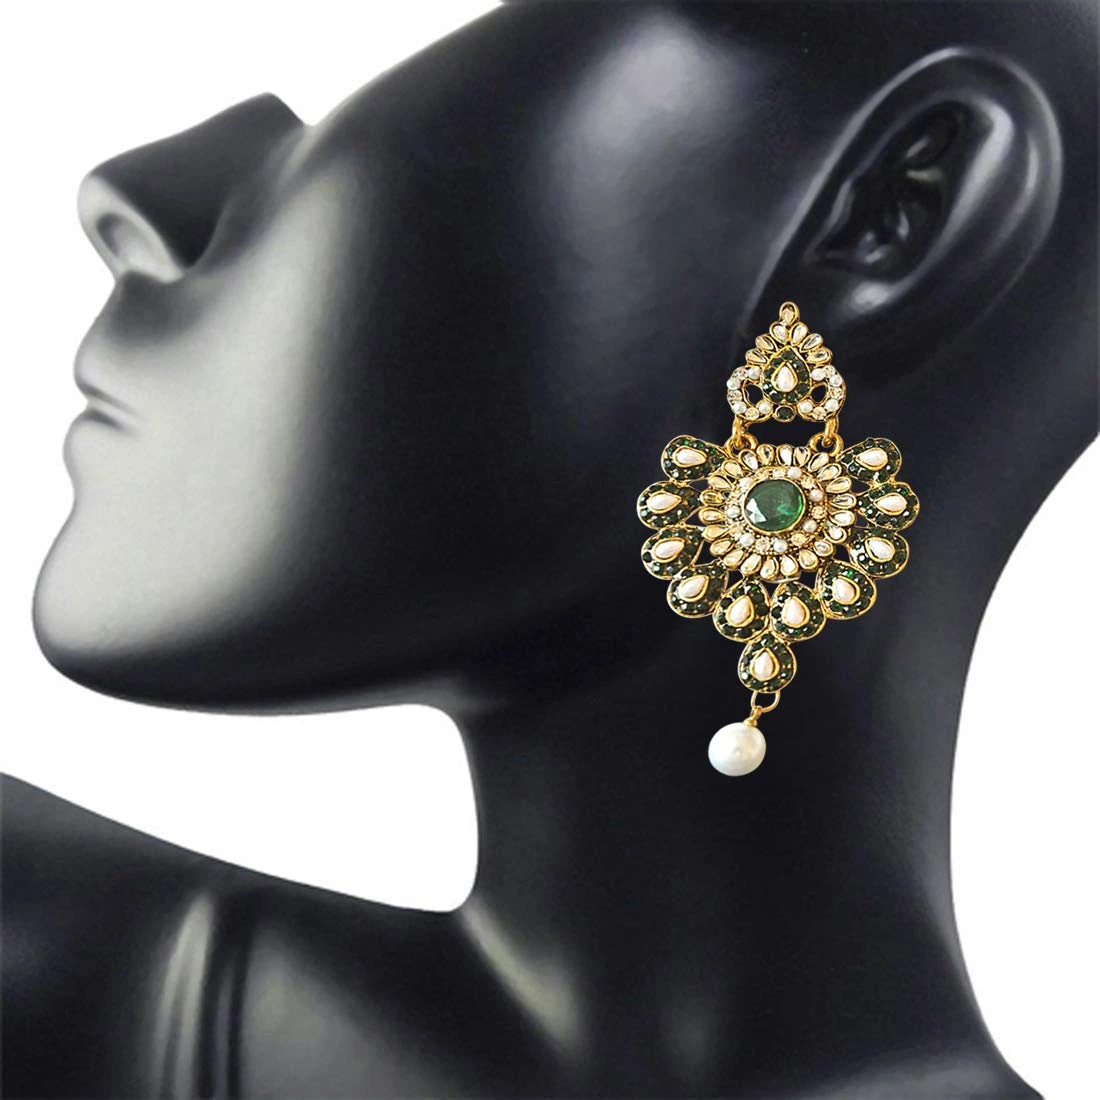 Floral Designed Green & White Stones, Shell Pearl & Gold Plated Chand Bali Earrings (PSE19)